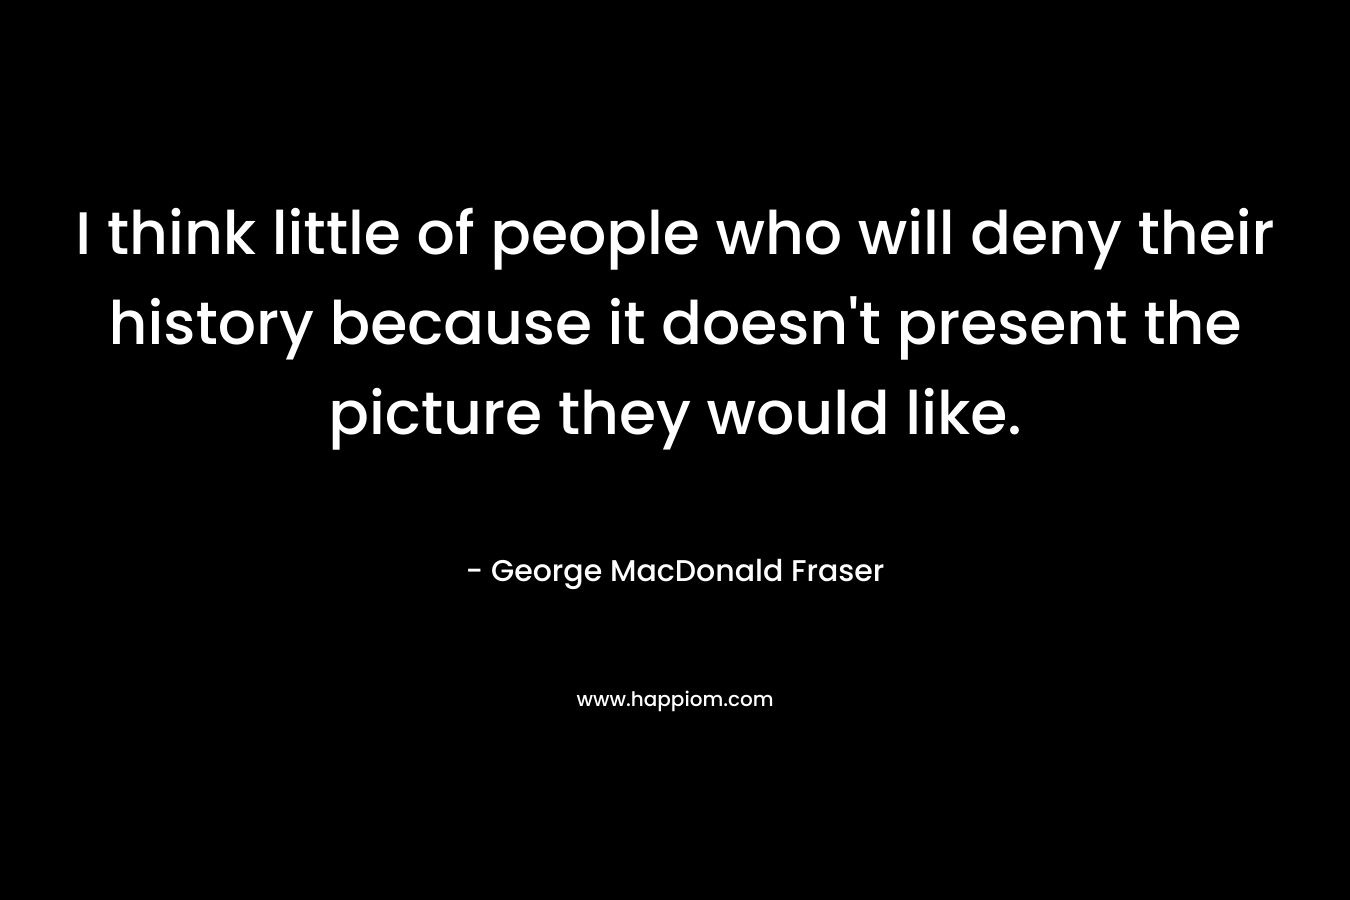 I think little of people who will deny their history because it doesn’t present the picture they would like. – George MacDonald Fraser